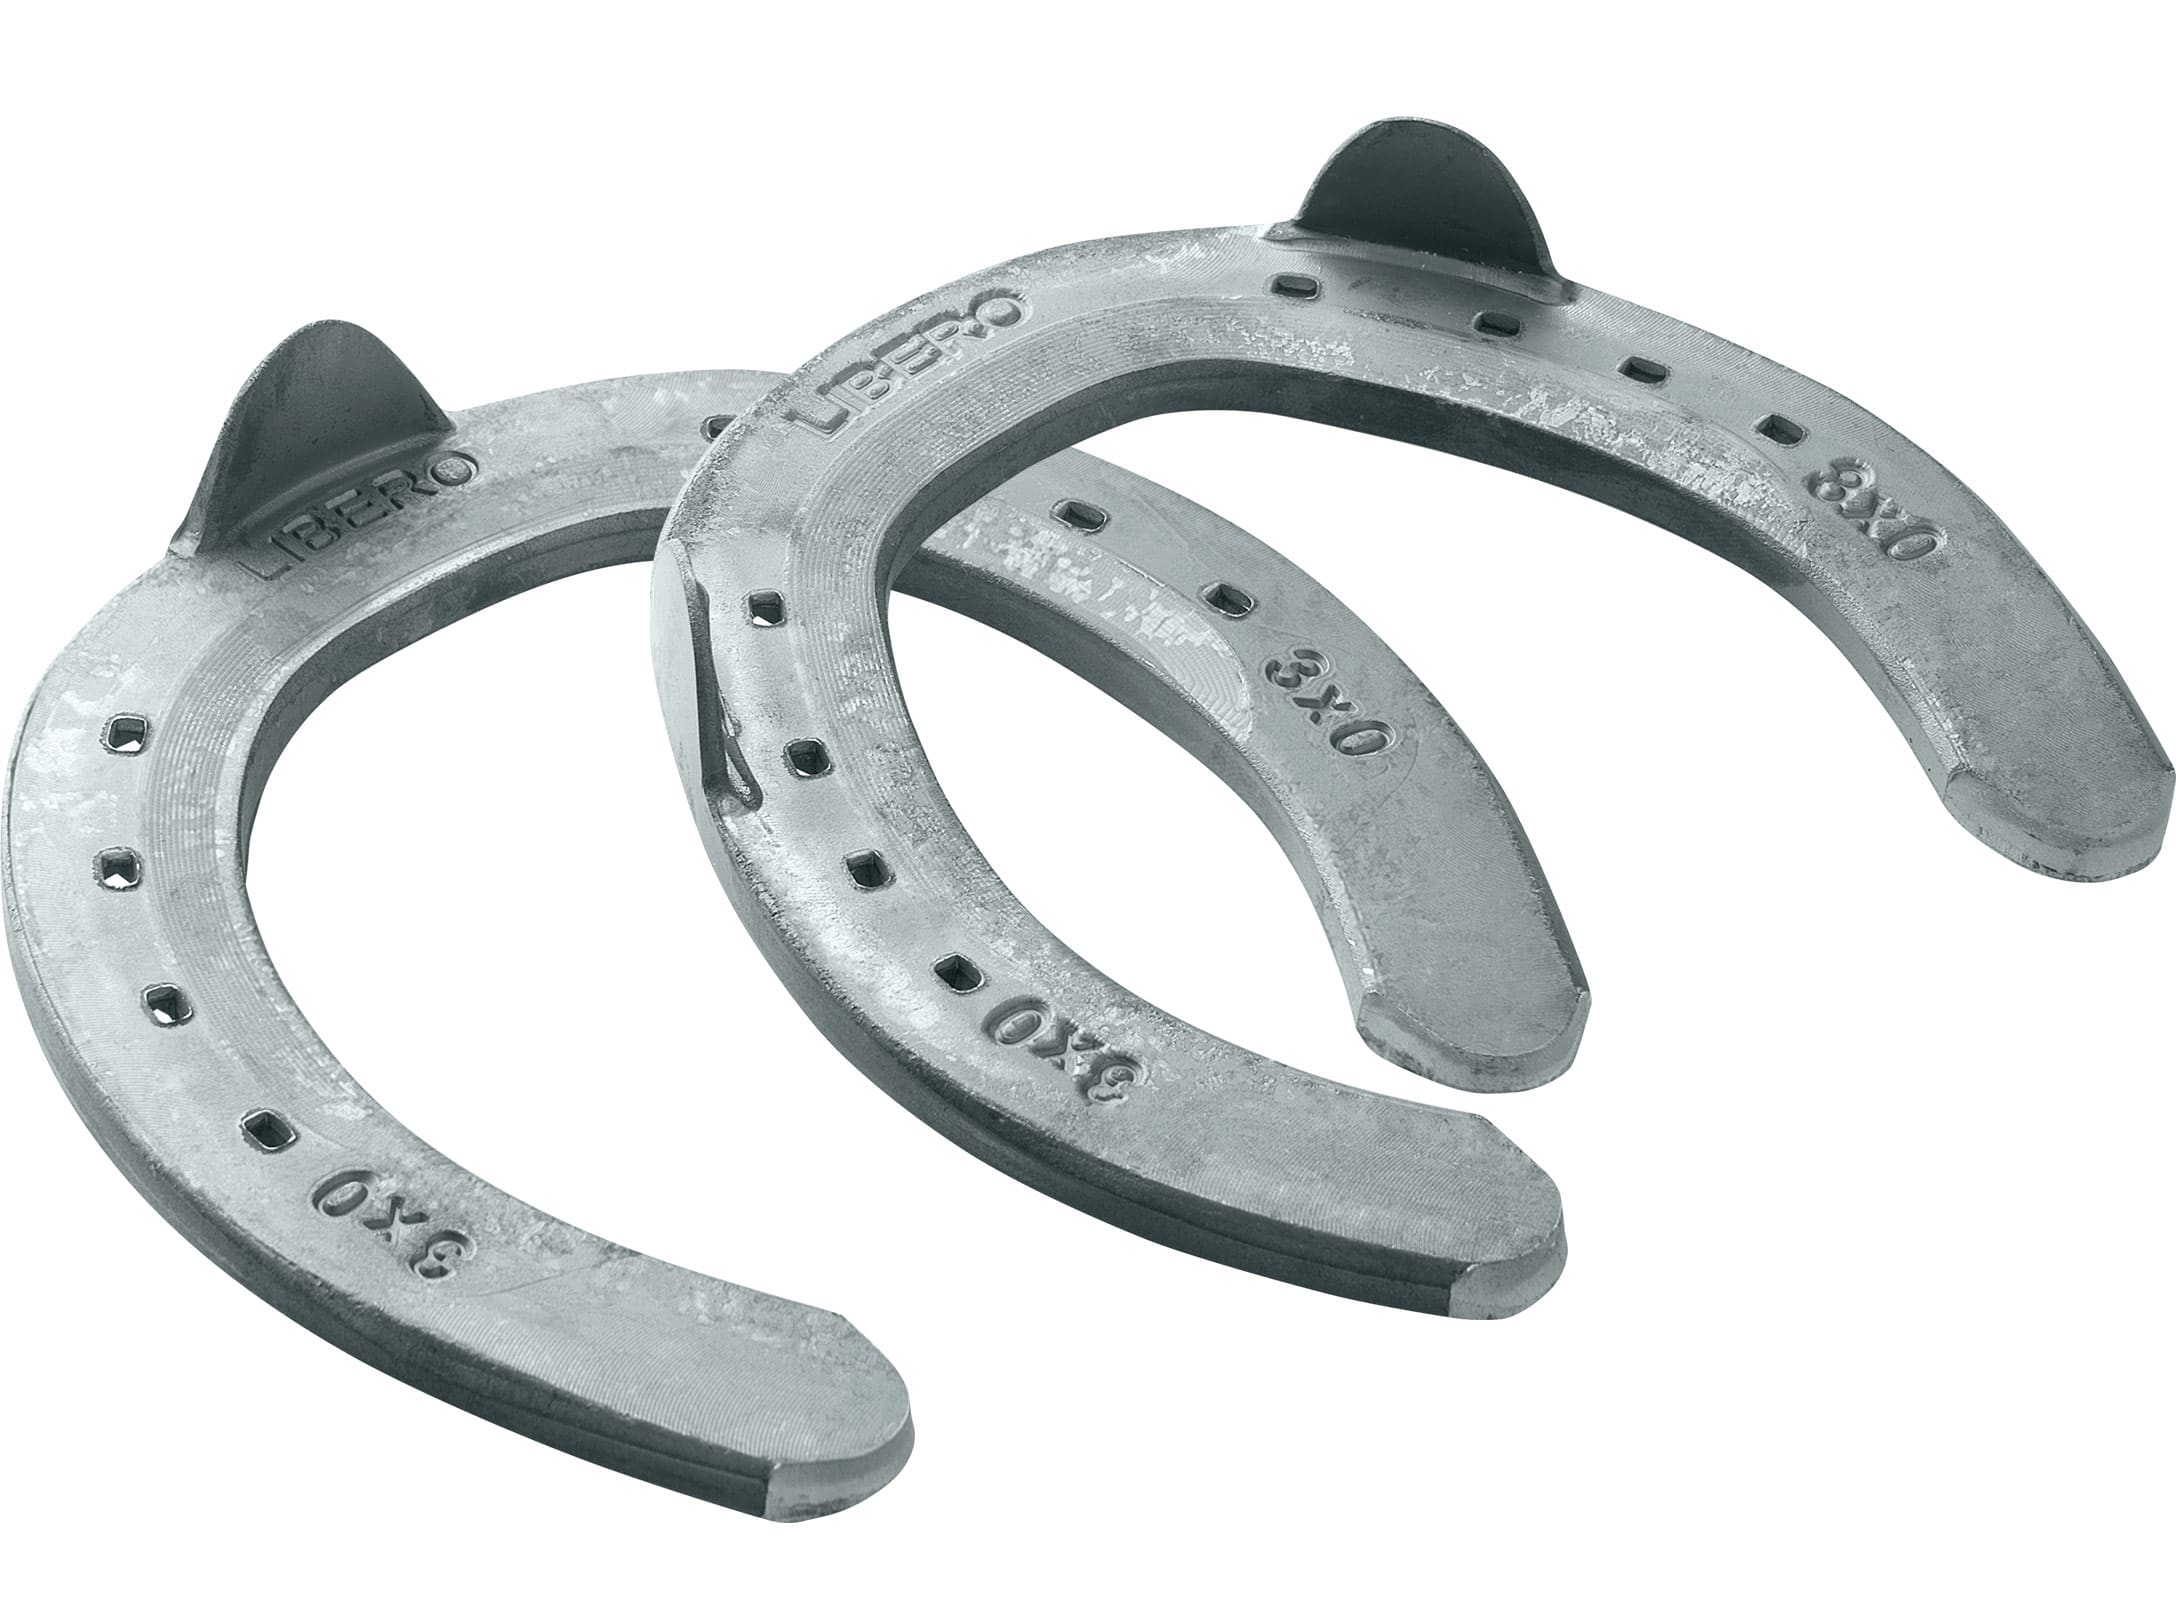 Mustad LiBero Pony horseshoes, front and hind, 3D top view